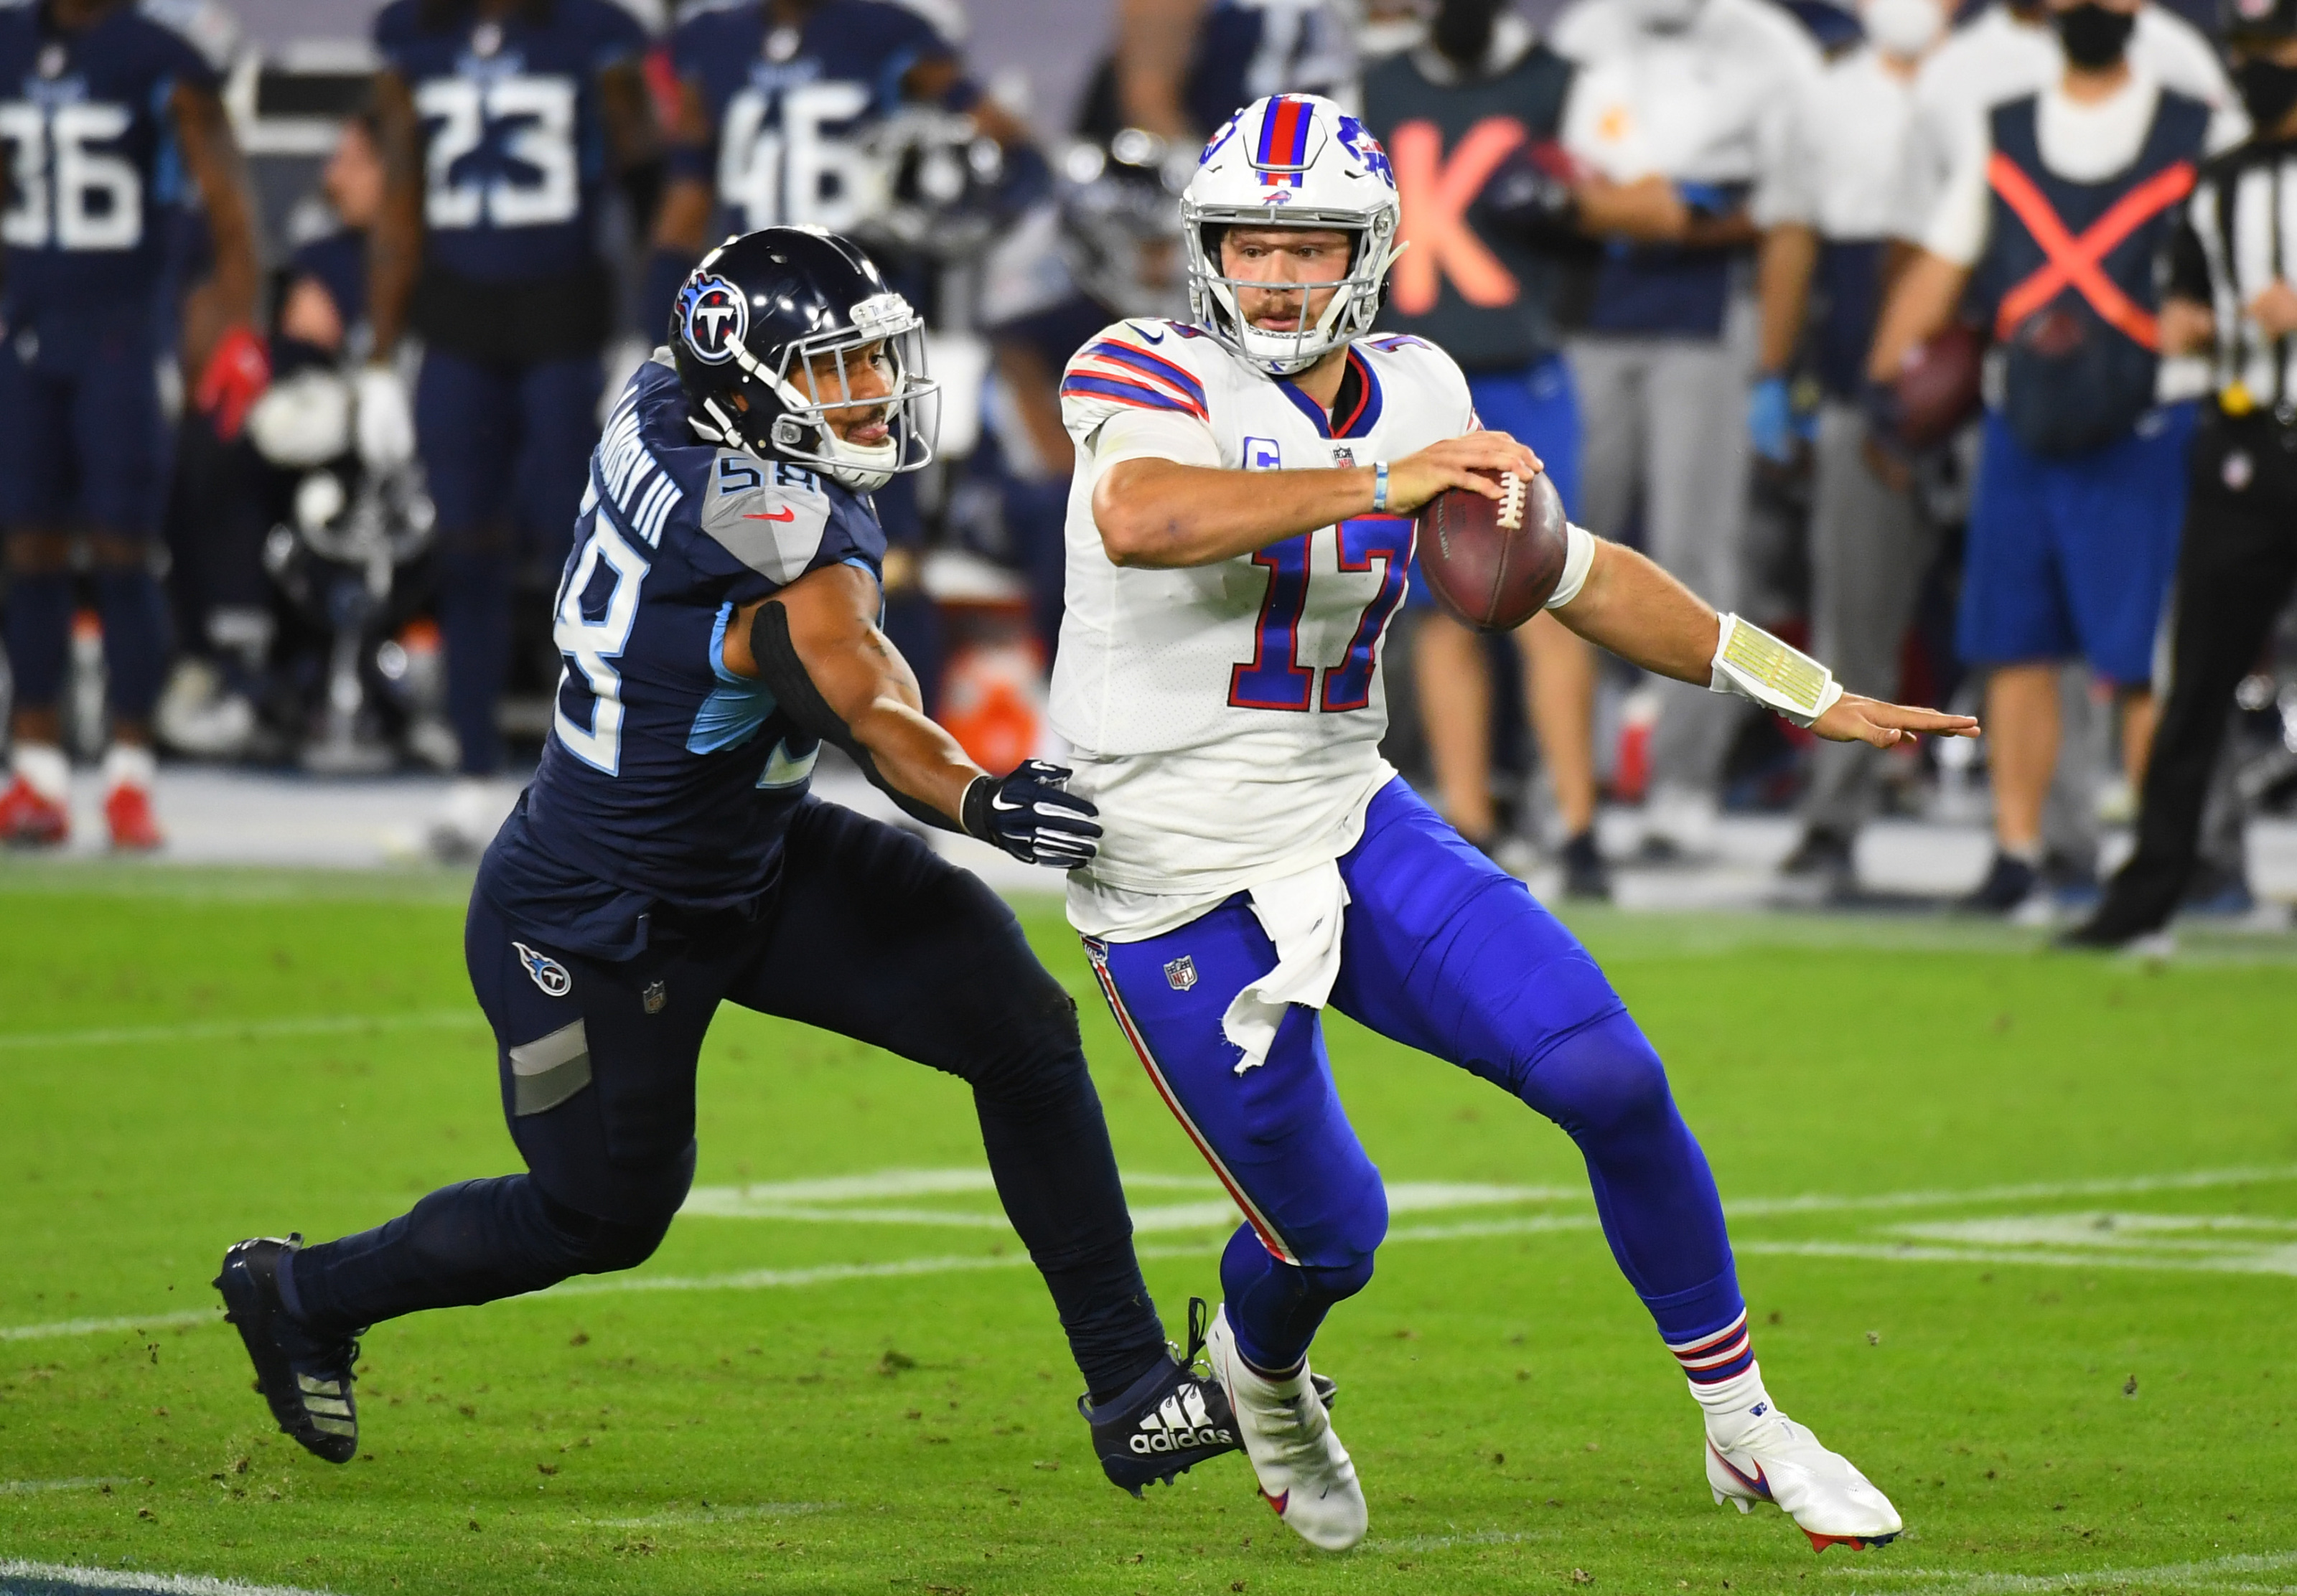 NFL on X: Josh Allen is heading into year 5 in the NFL and the